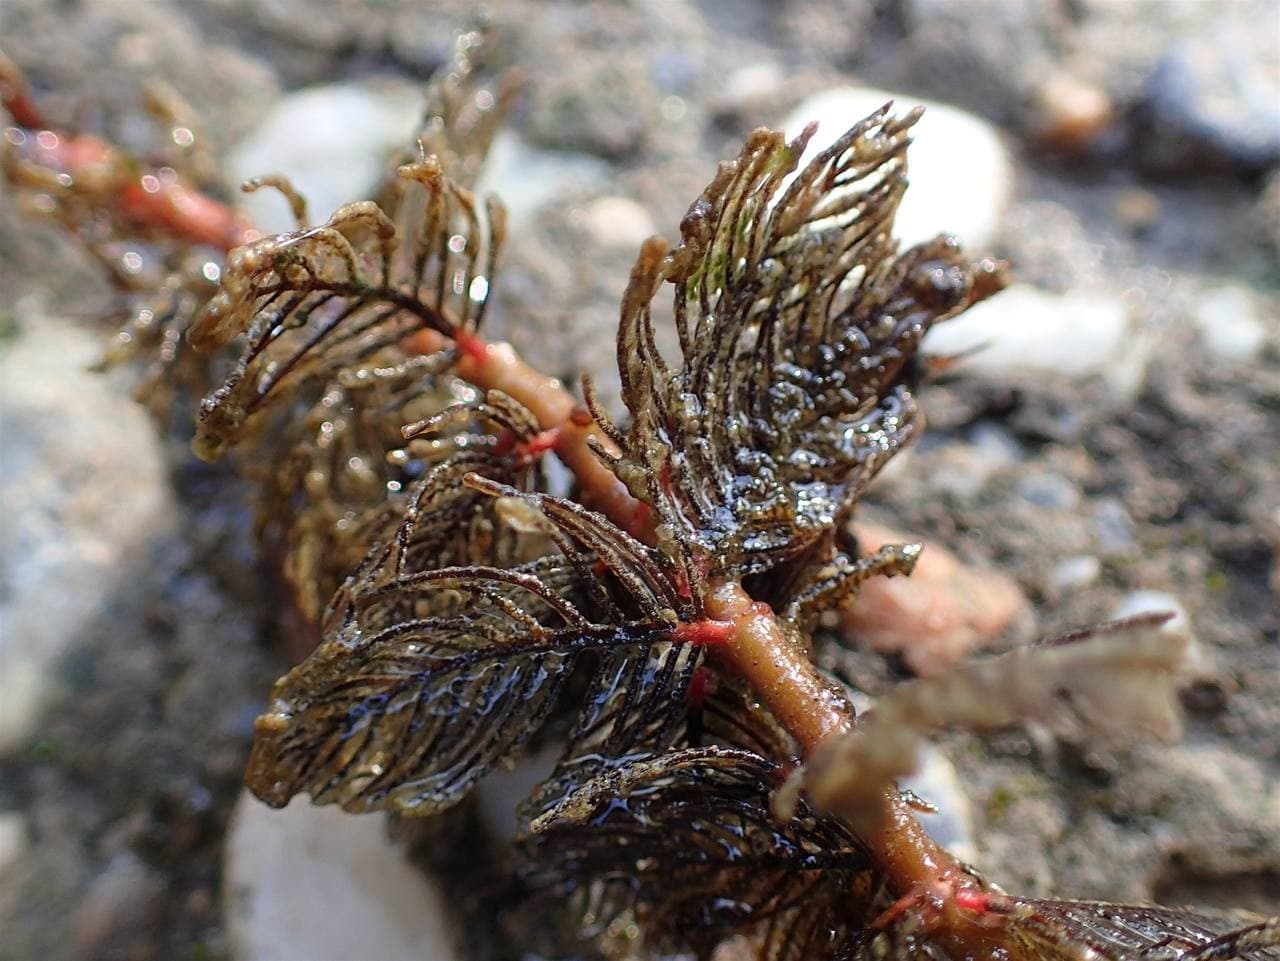 spiked water milfoil